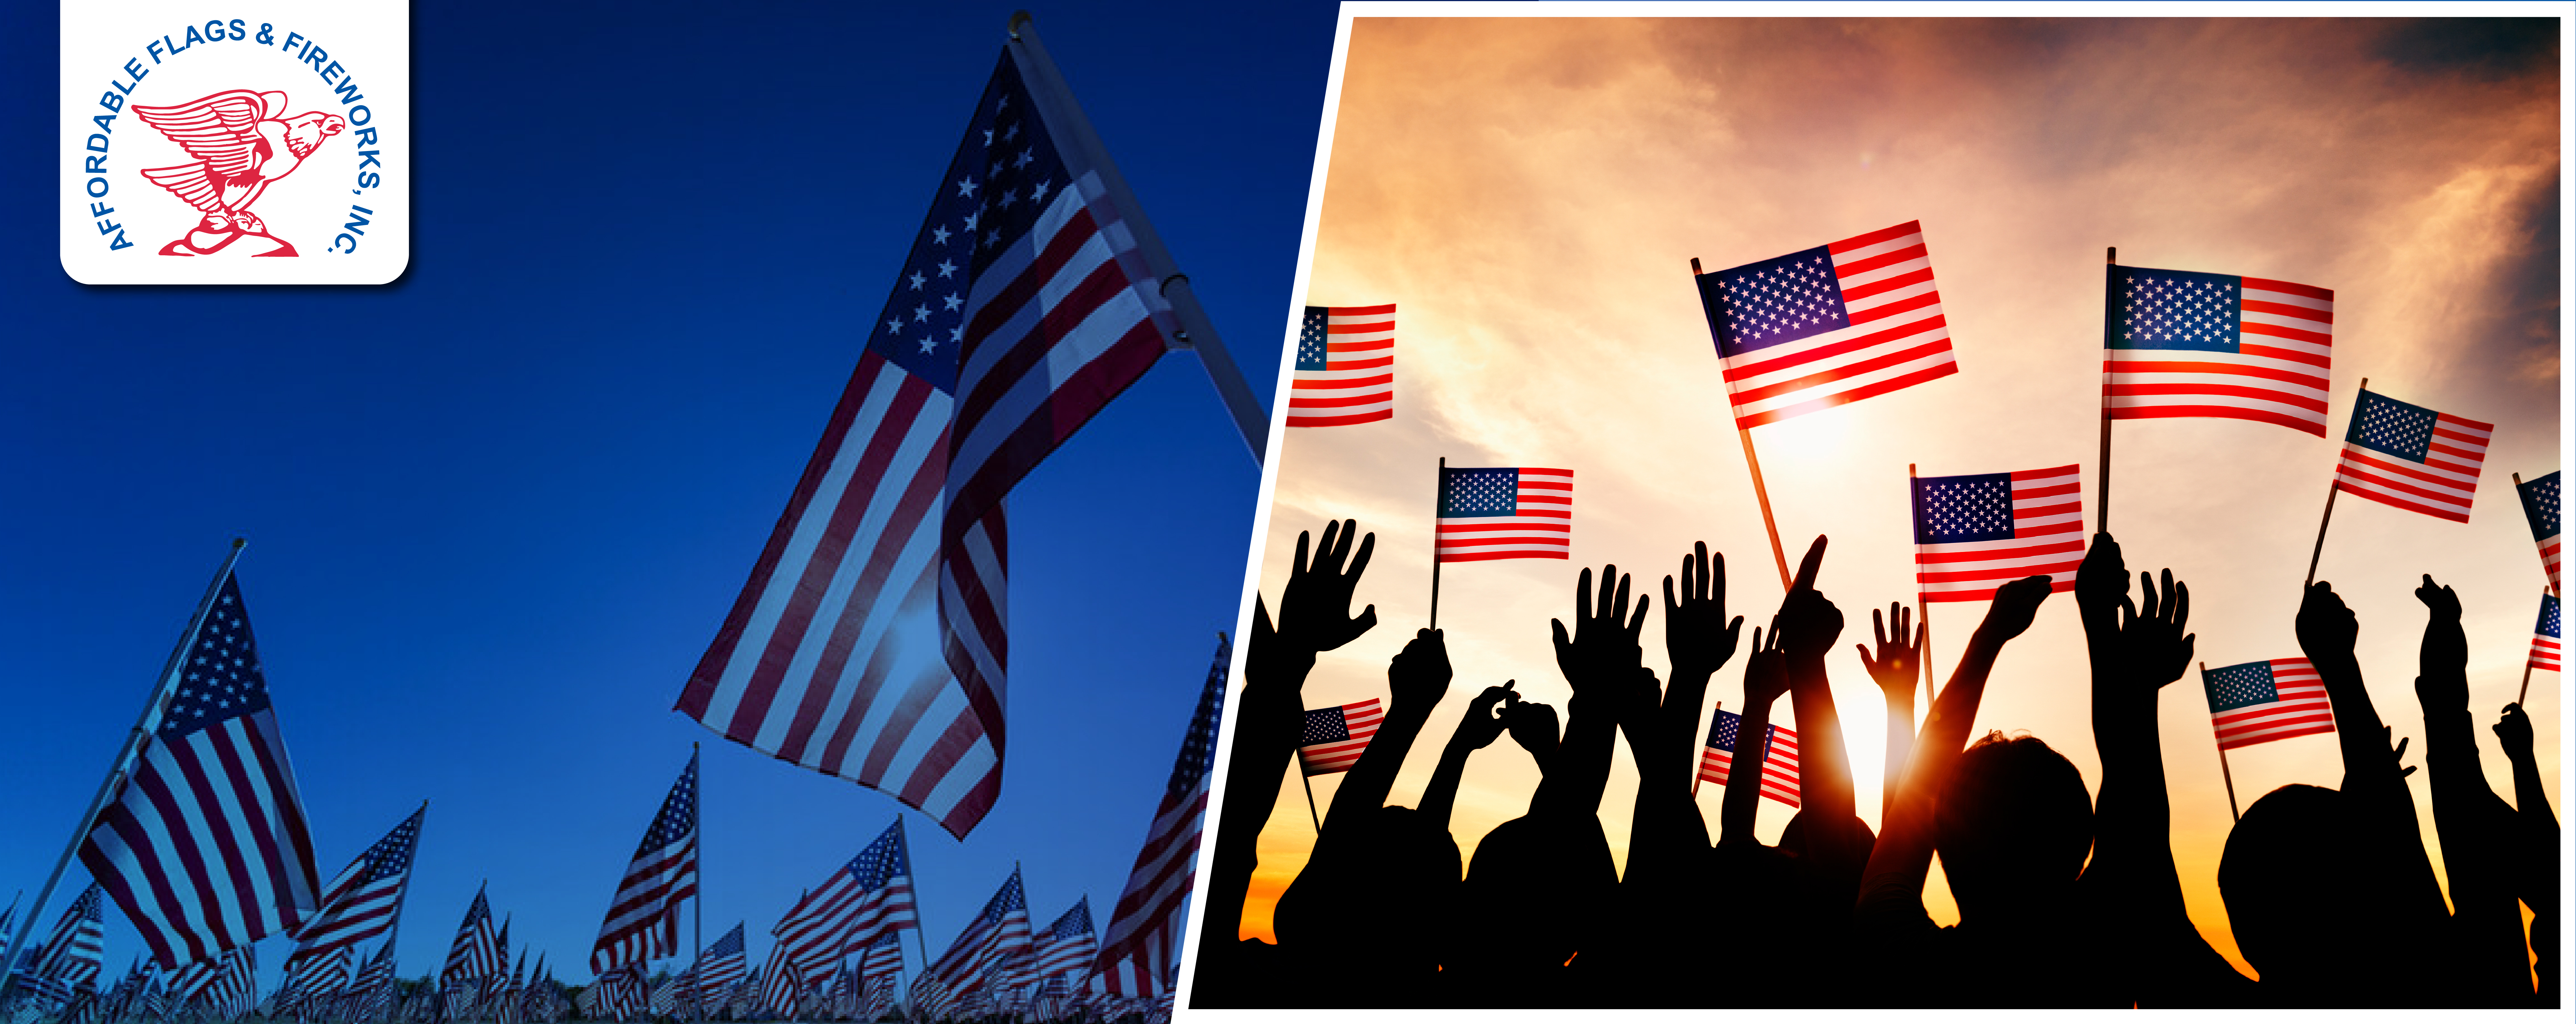 US-flags-at-background-alongside-shadow-image-of-people-cheering-hands-in-air